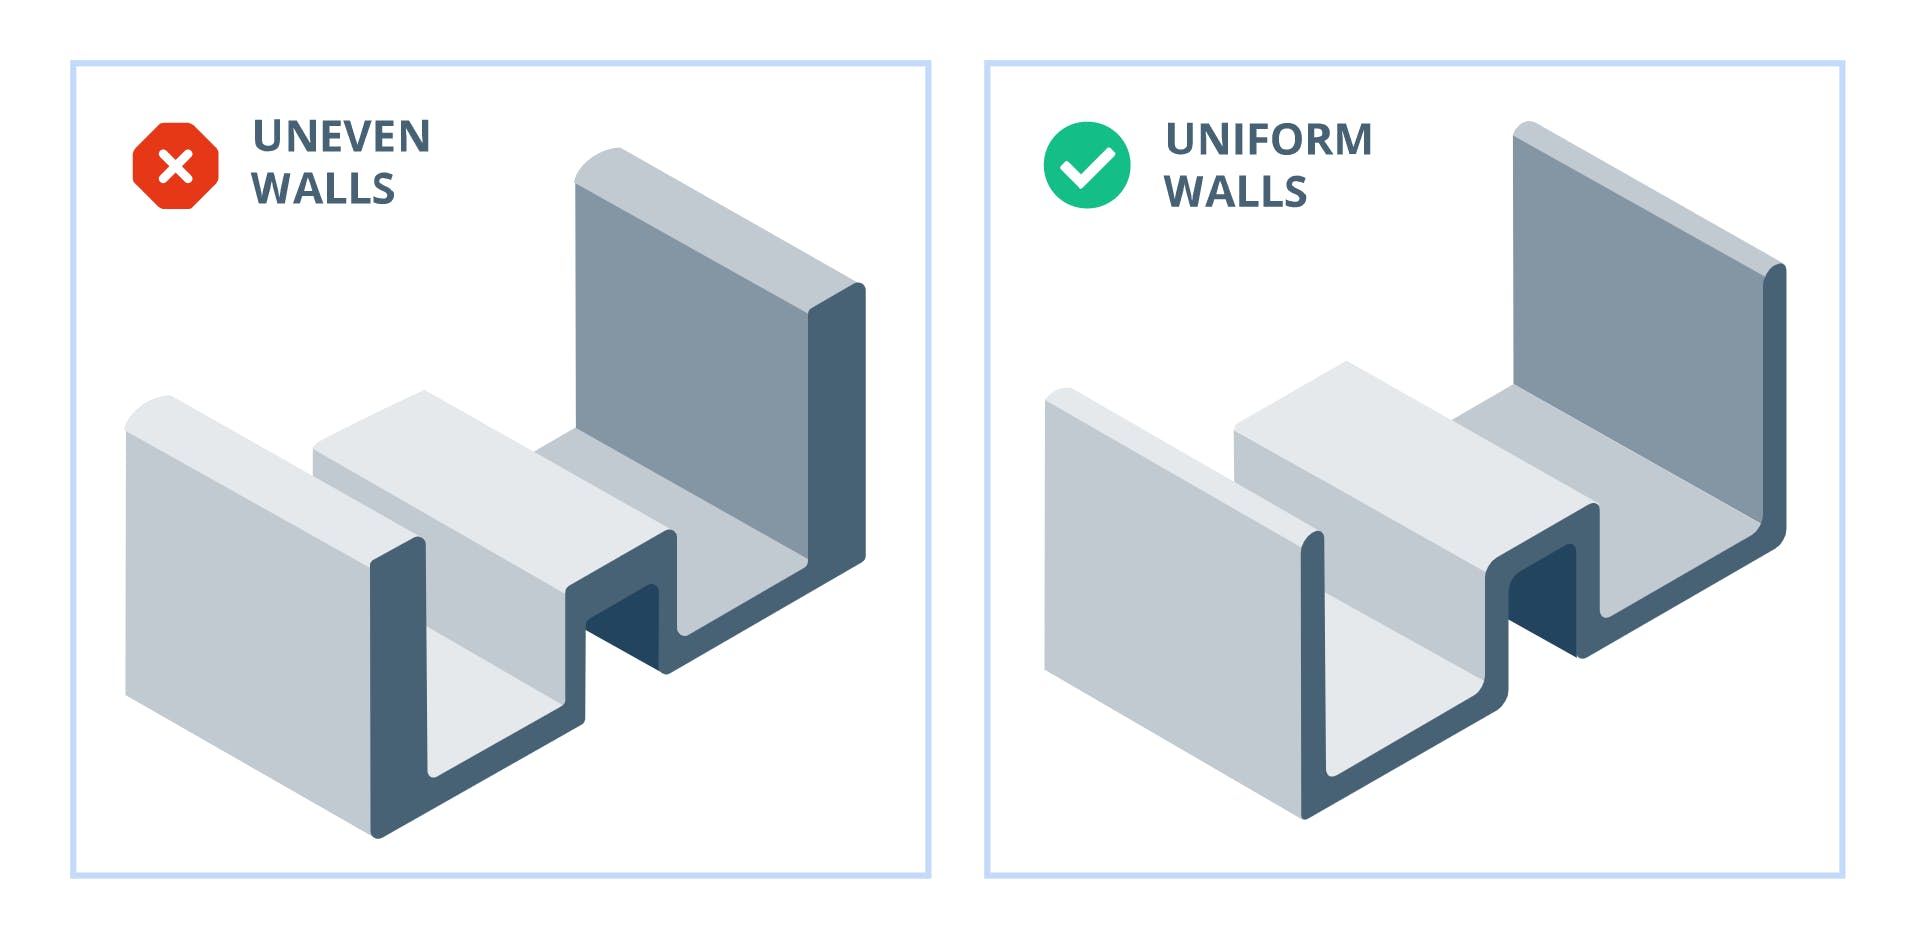 Extrusion design with uneven wall thickness vs. uniform wall thickness.